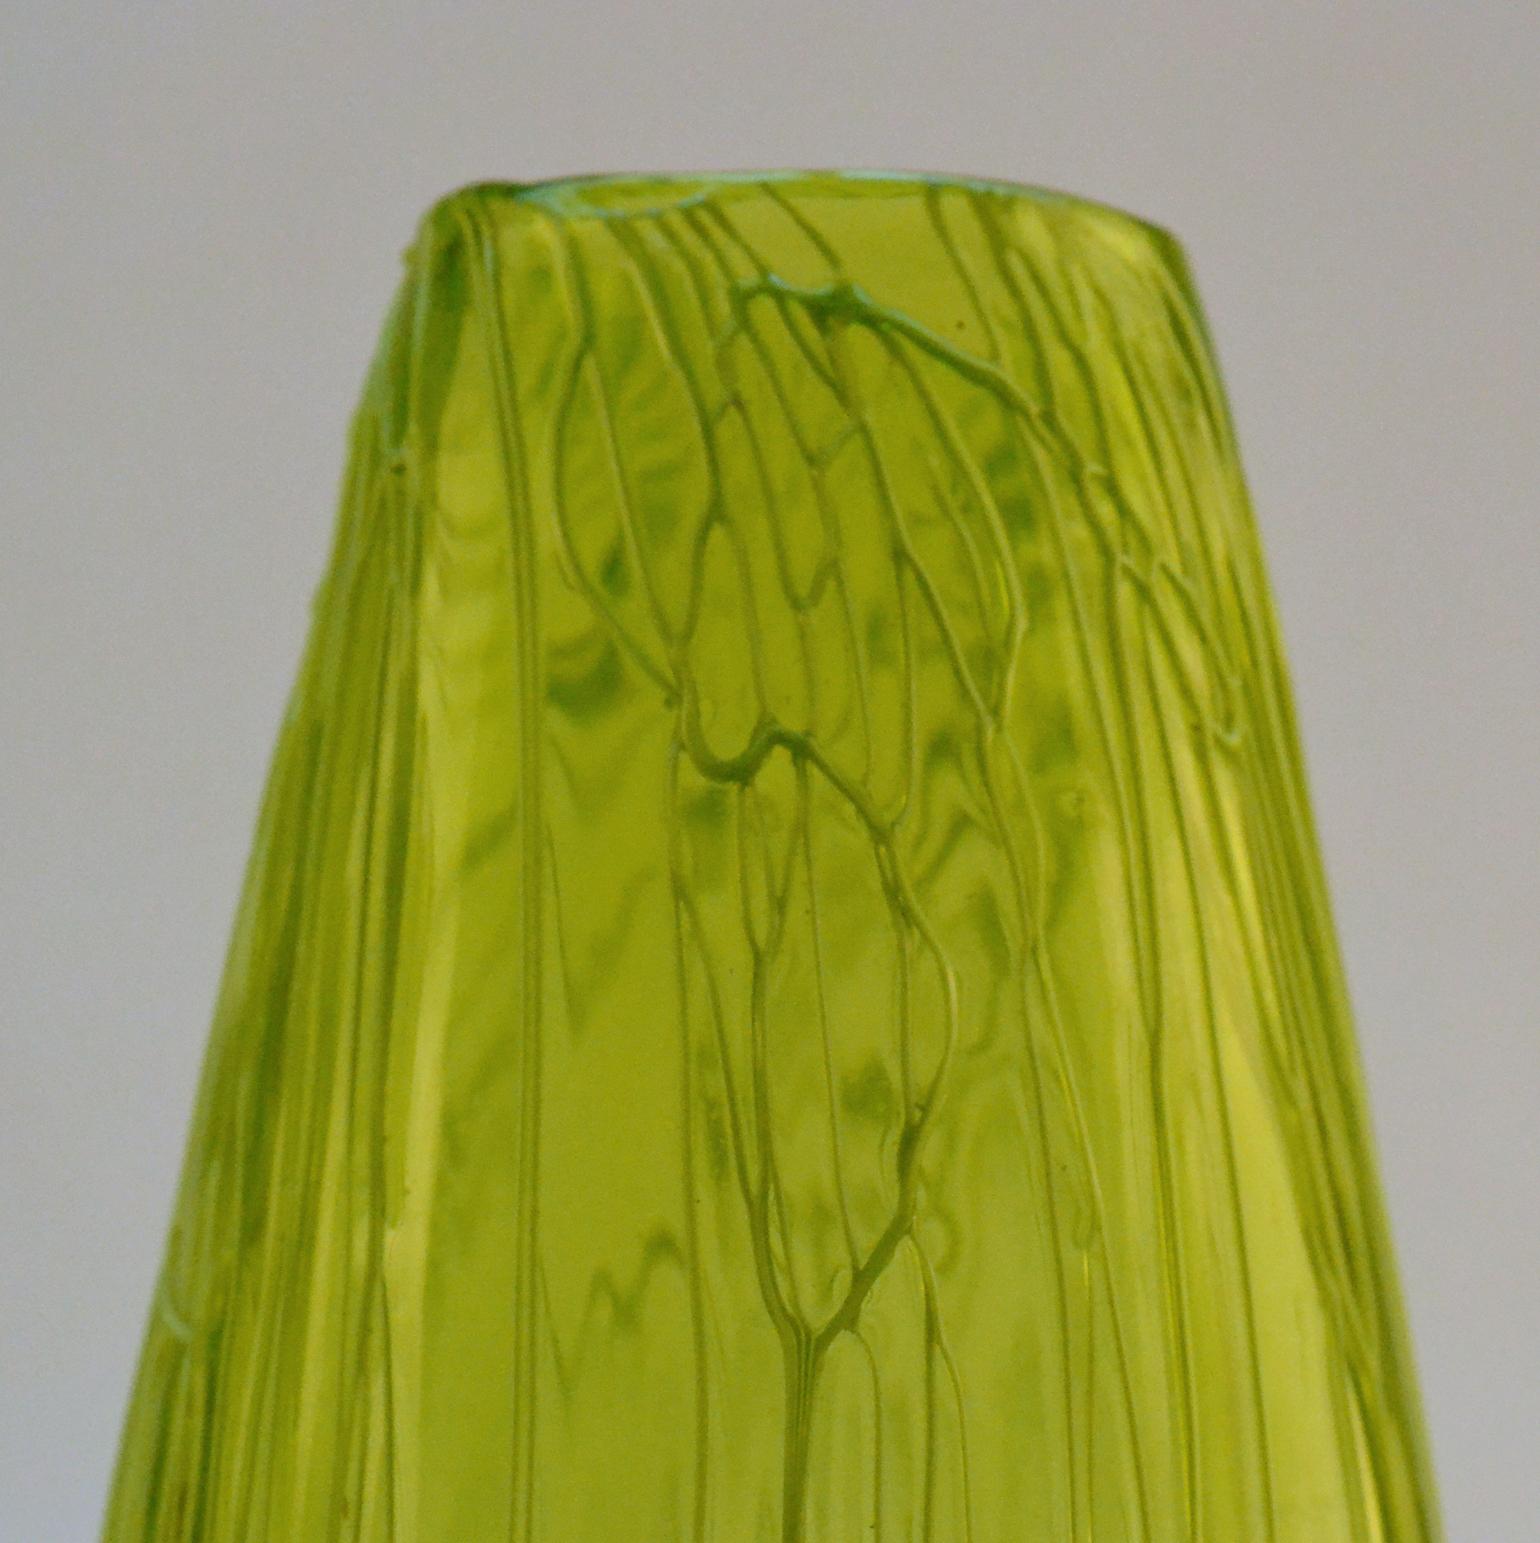 Pair of Hand Blown Glass Acid Green Veined Vases In Excellent Condition For Sale In London, GB